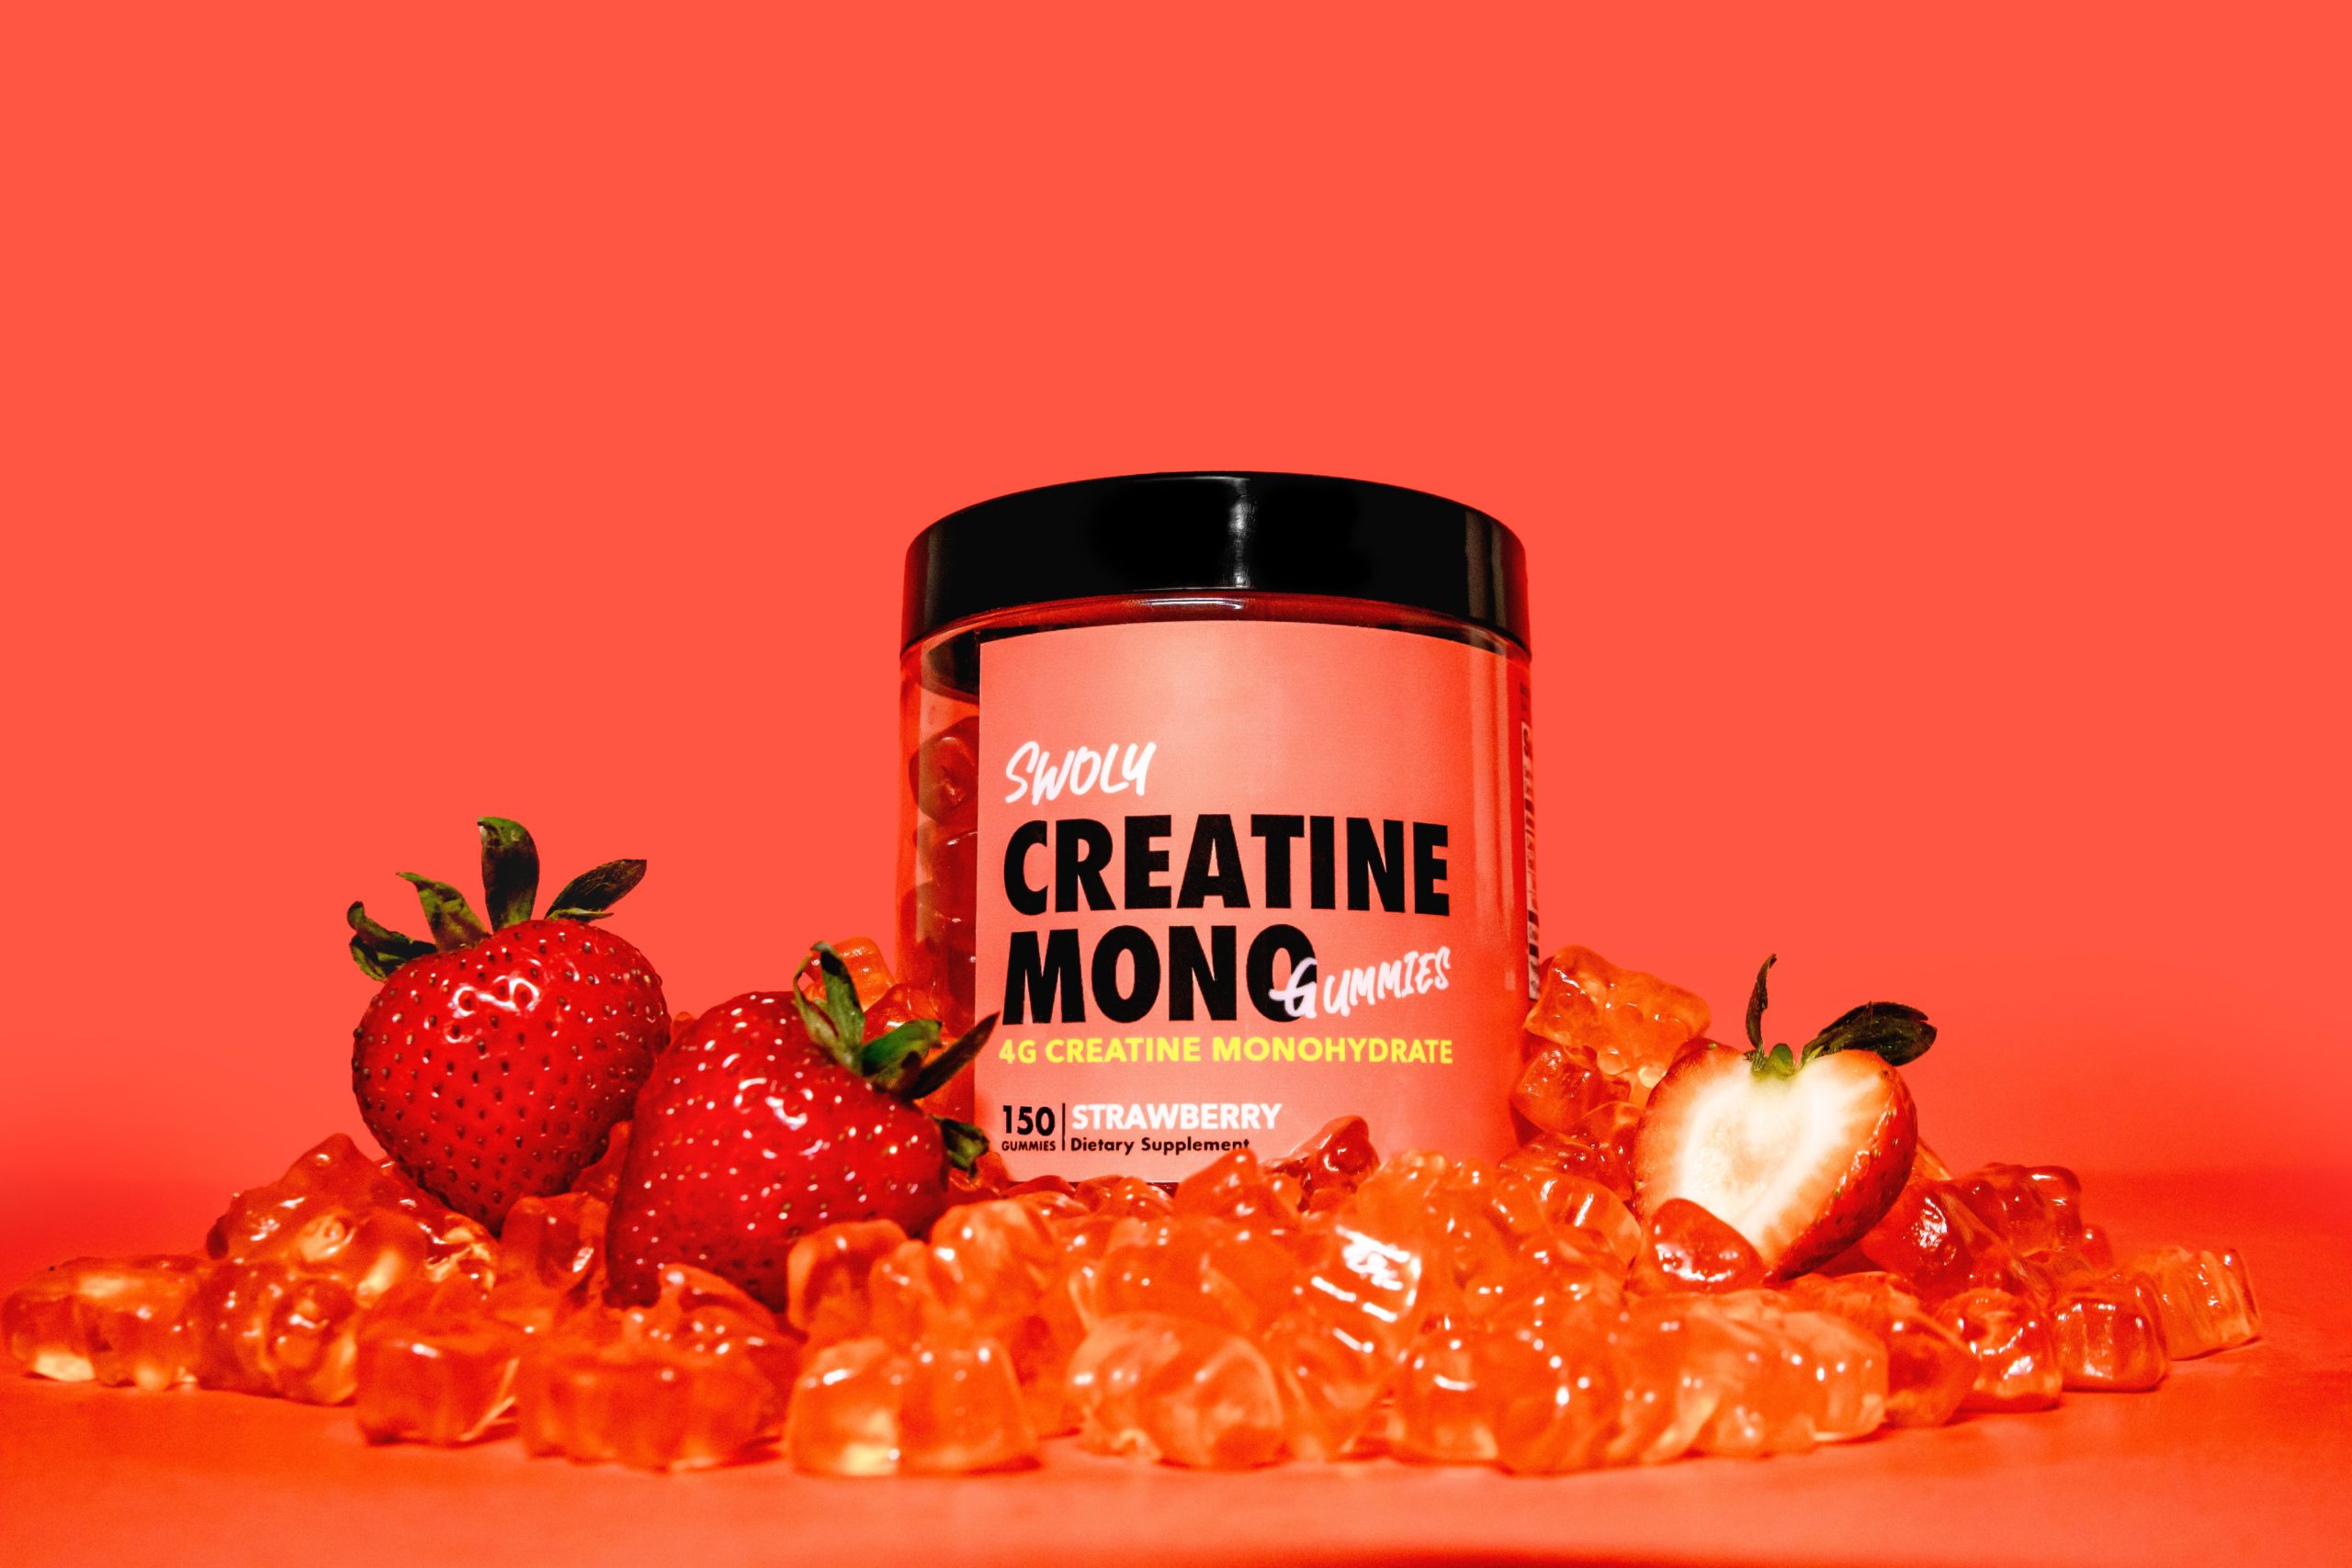 Is All Creatine Monohydrate the Same?